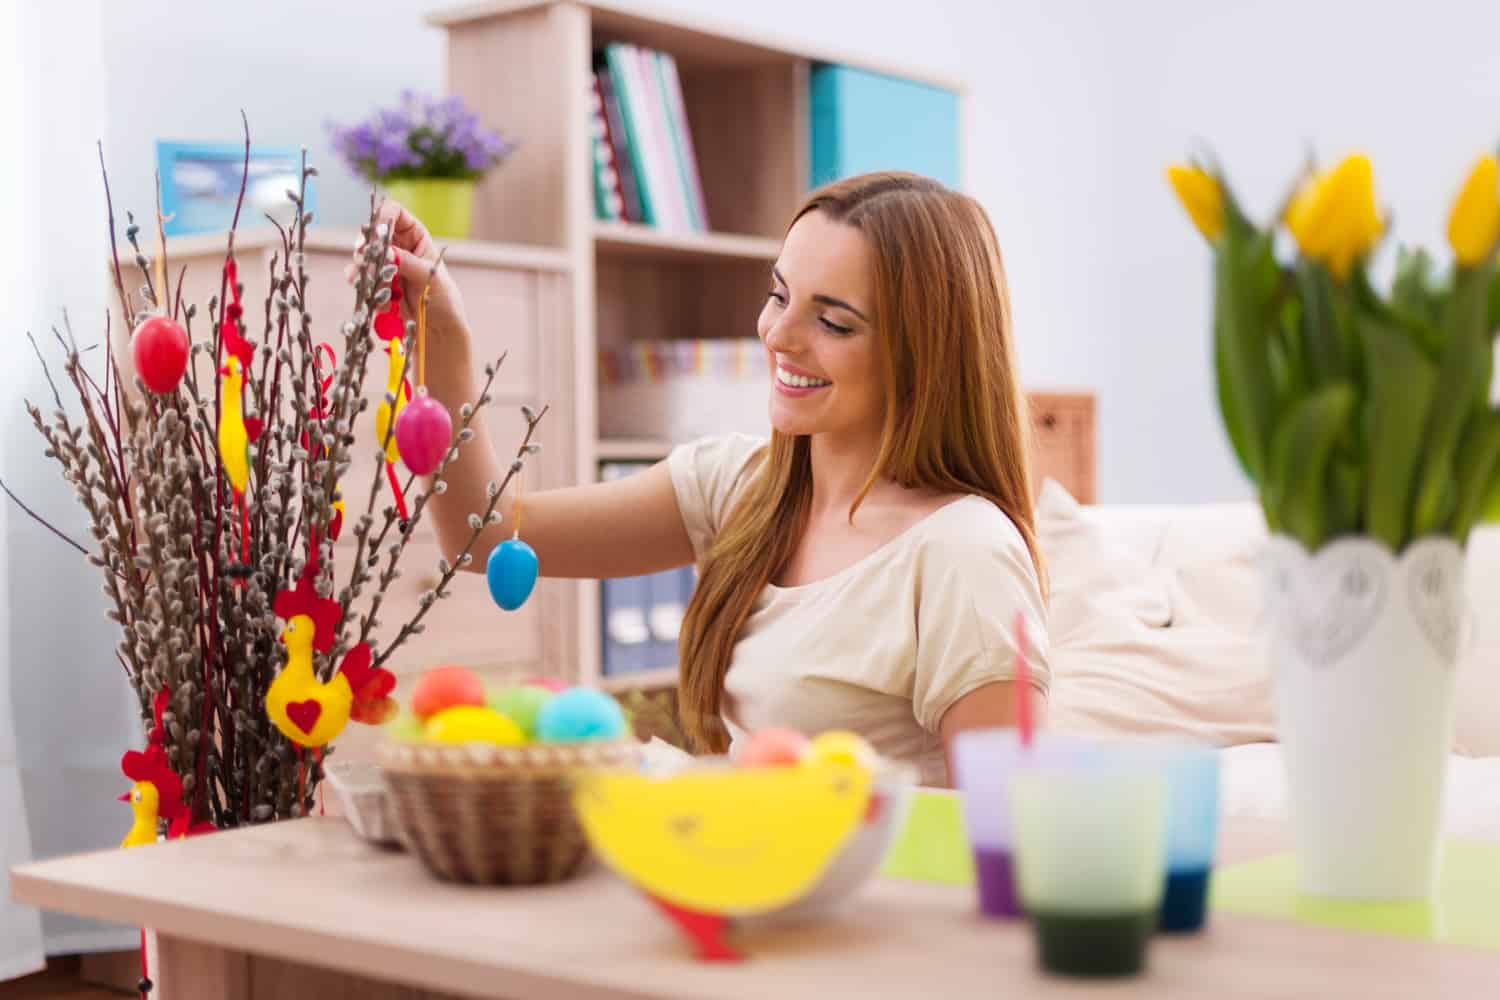 How to decorate your home for Easter?